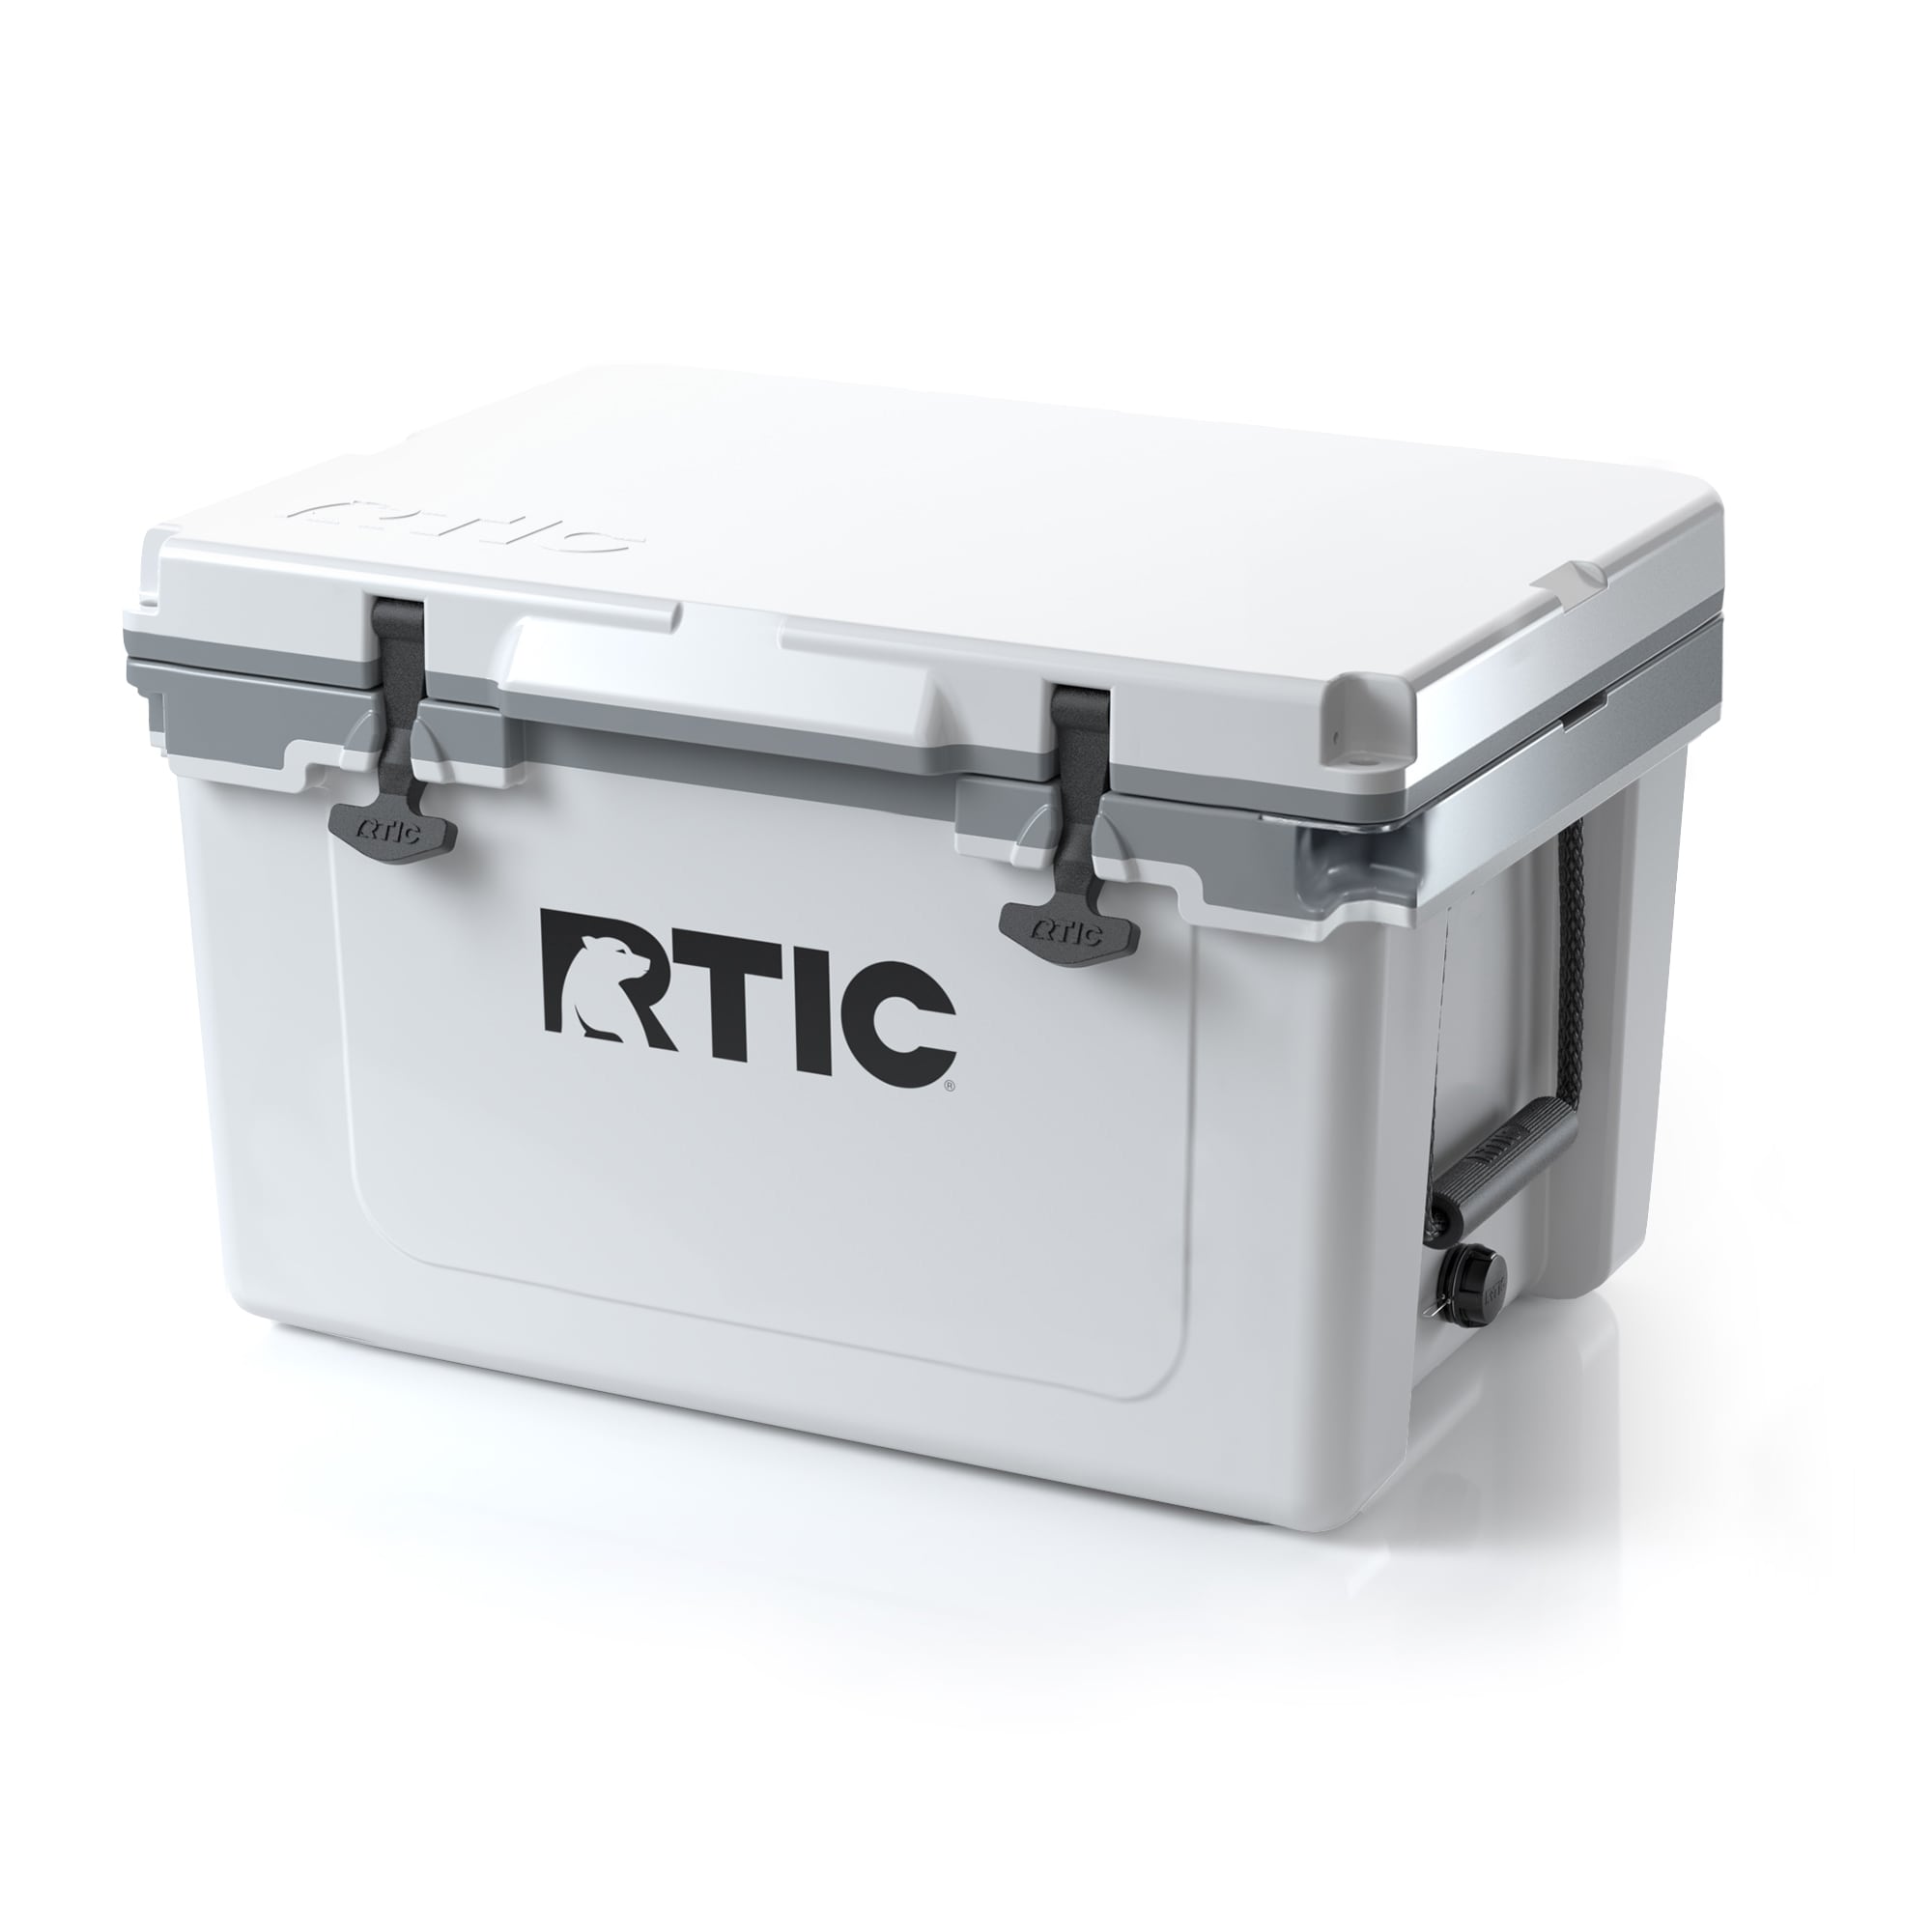 RTIC Outdoors Hard Cooler Tan 65-Quart Insulated Personal Cooler